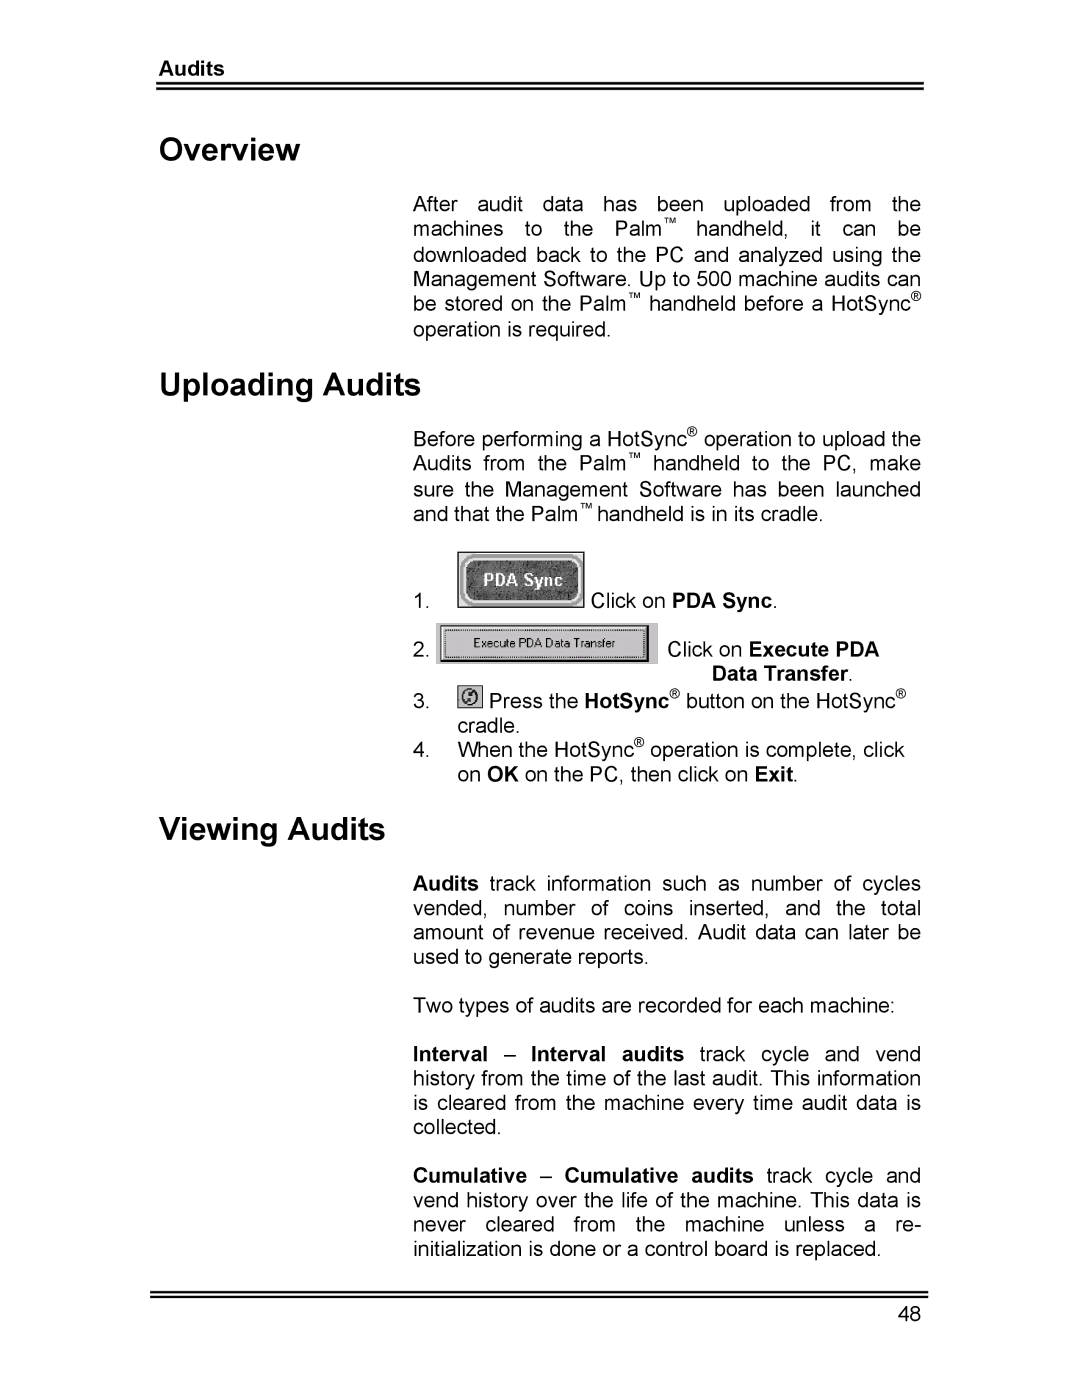 Whirlpool CL-8 user manual Overview, Uploading Audits, Viewing Audits 